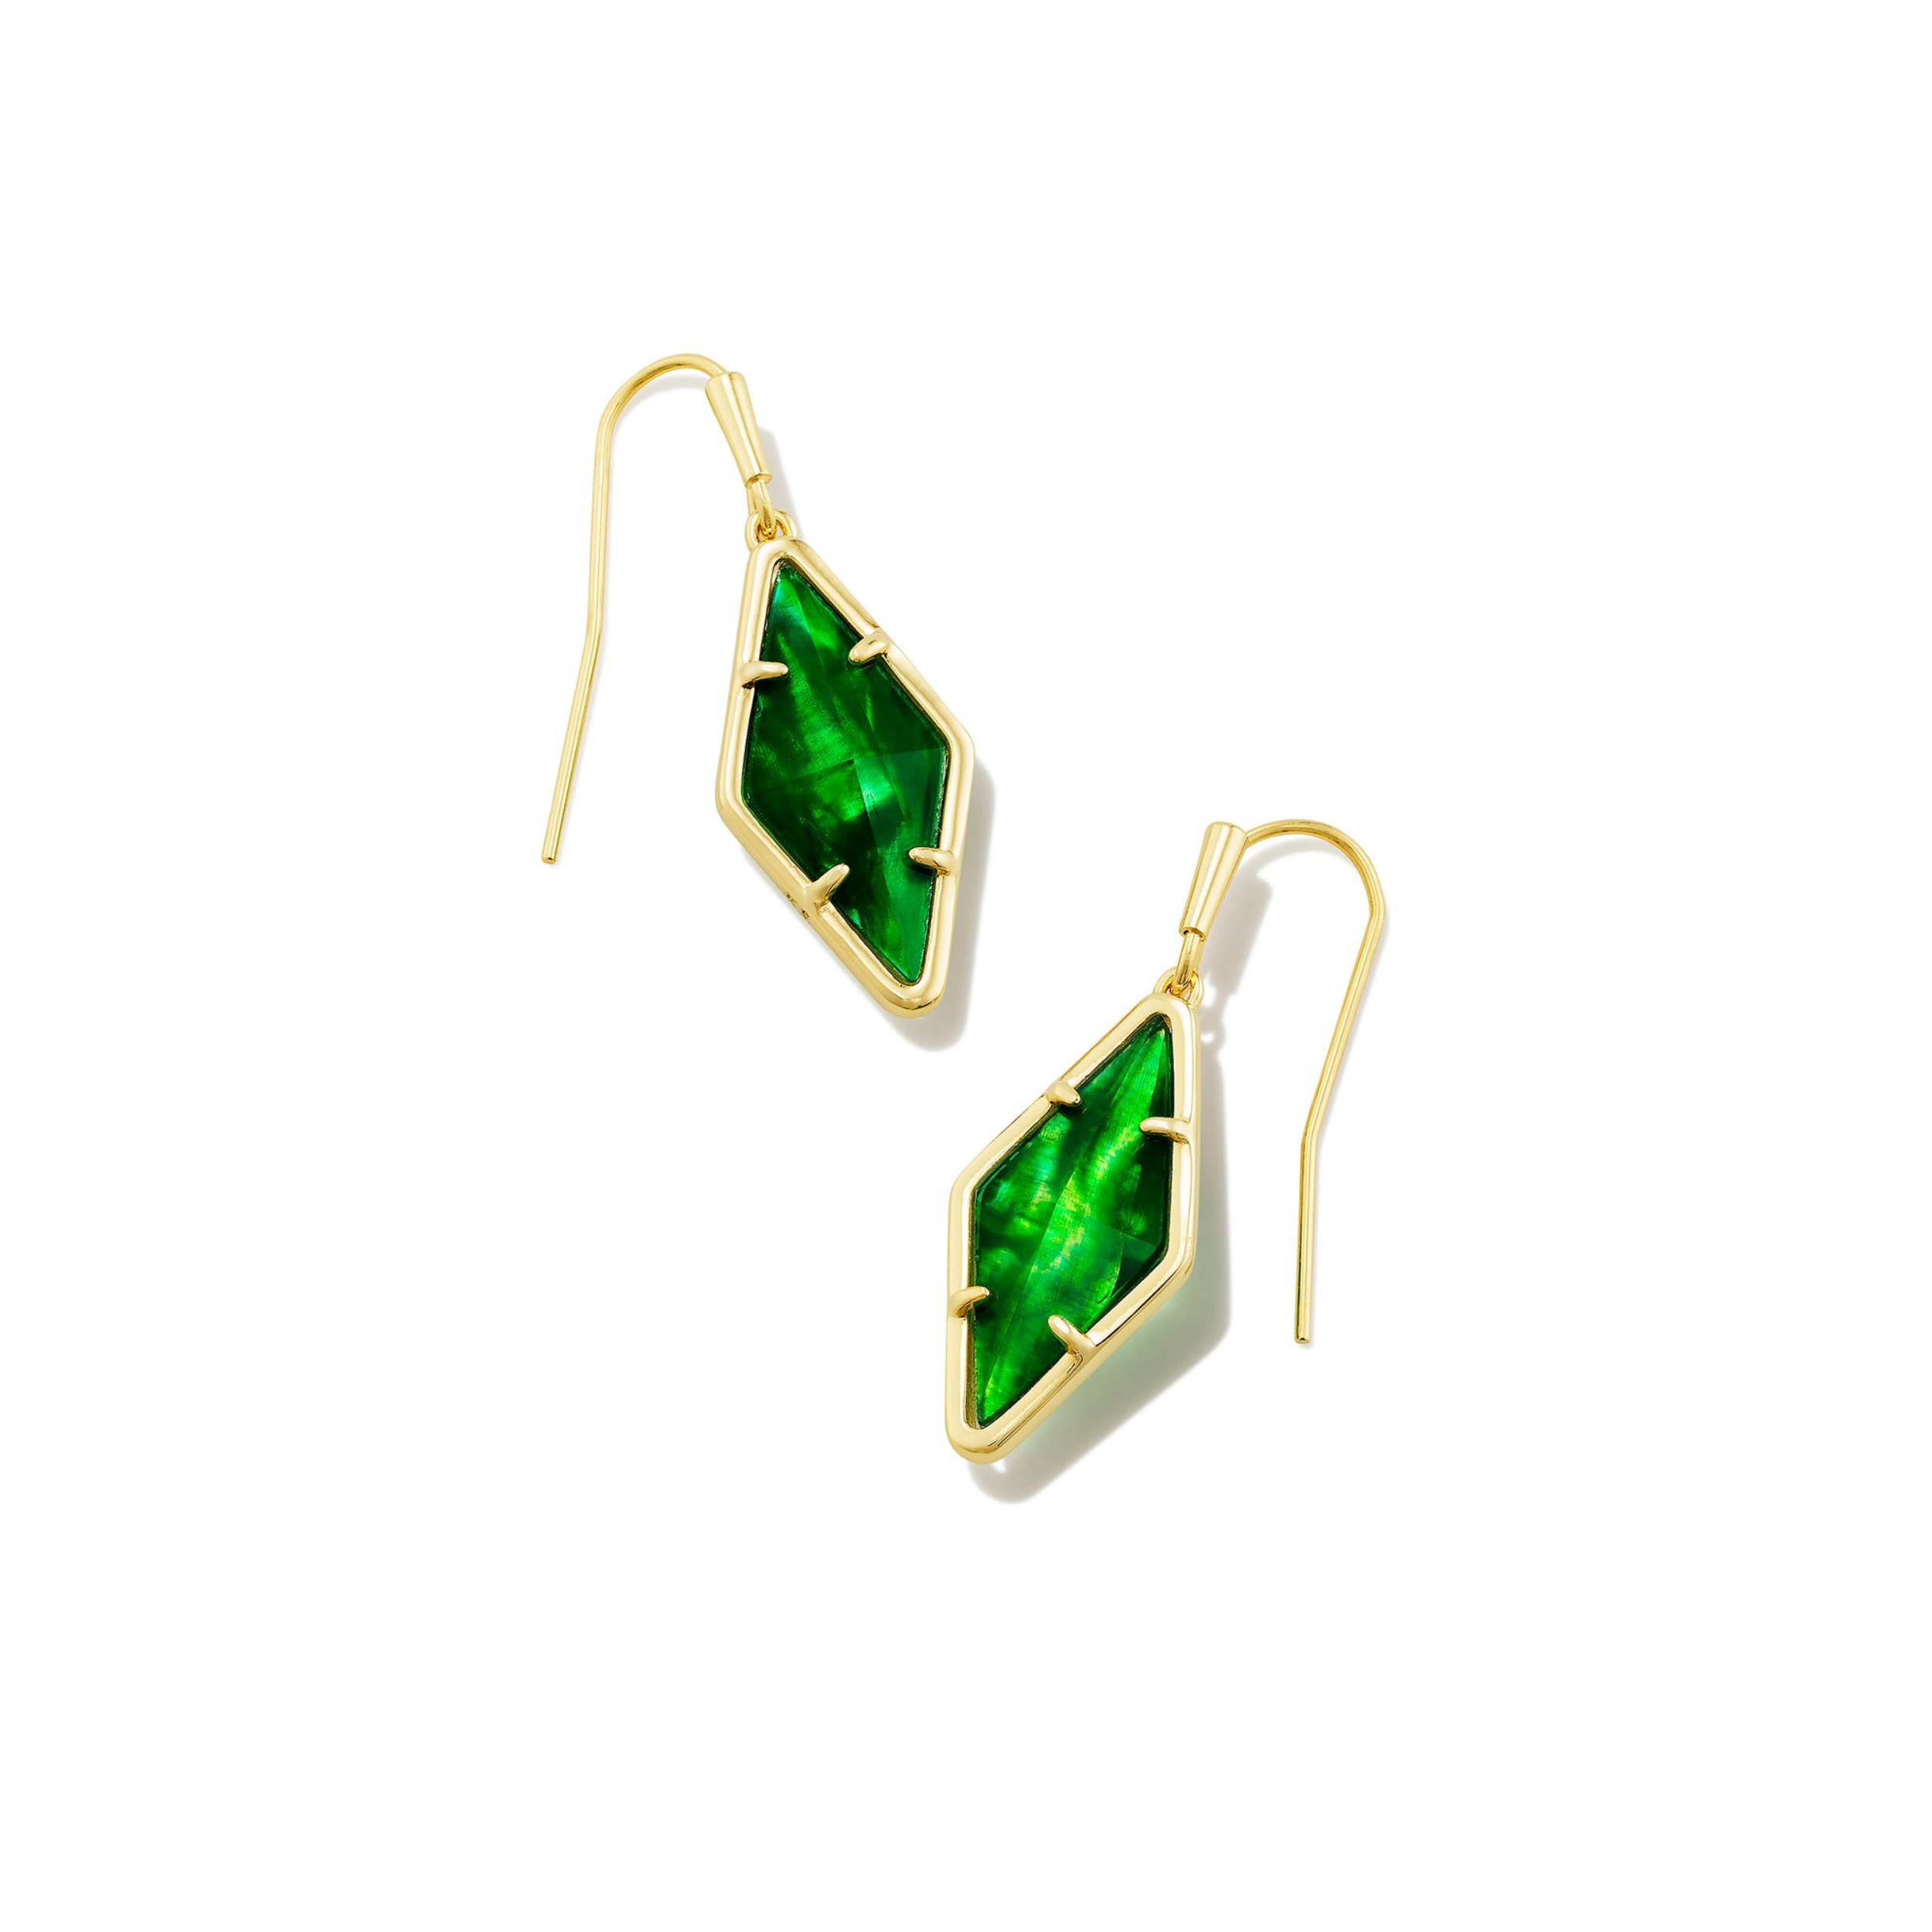 Gold, fish hook diamond drop earrings with a kelly green illusion stone pictured on a white background.